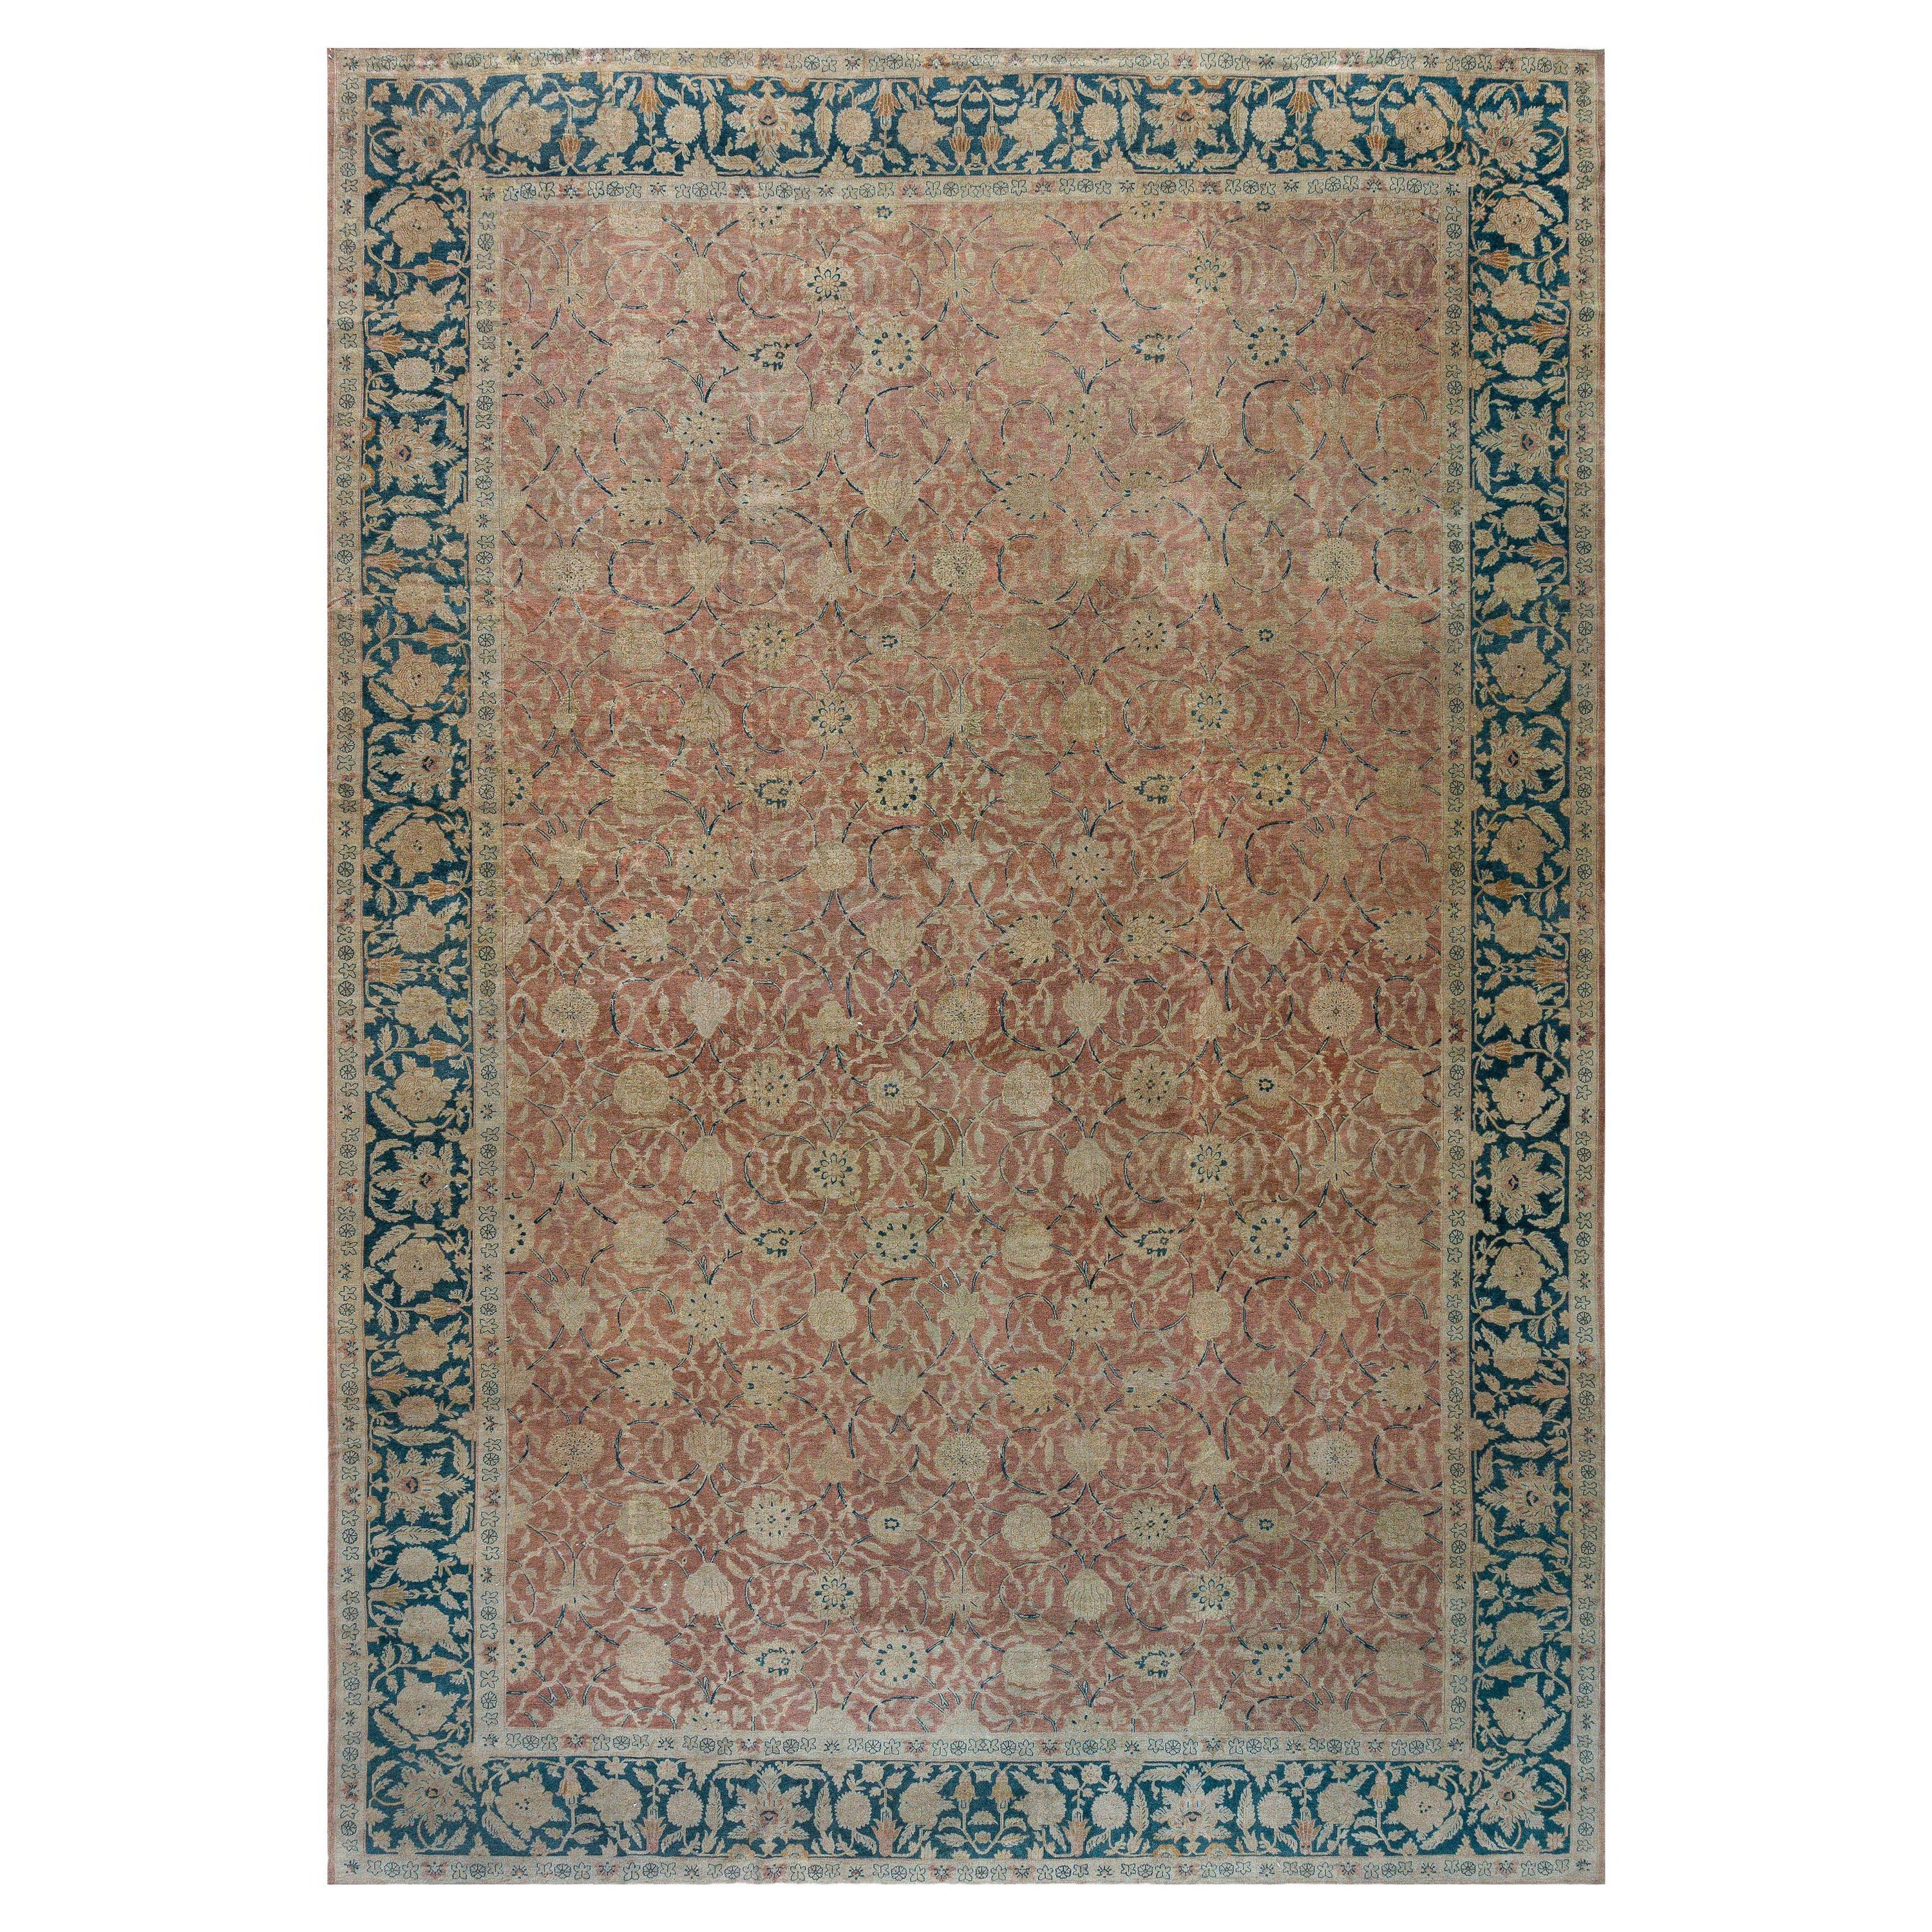 Authentic Indian Botanic Handmade Wool Carpet For Sale